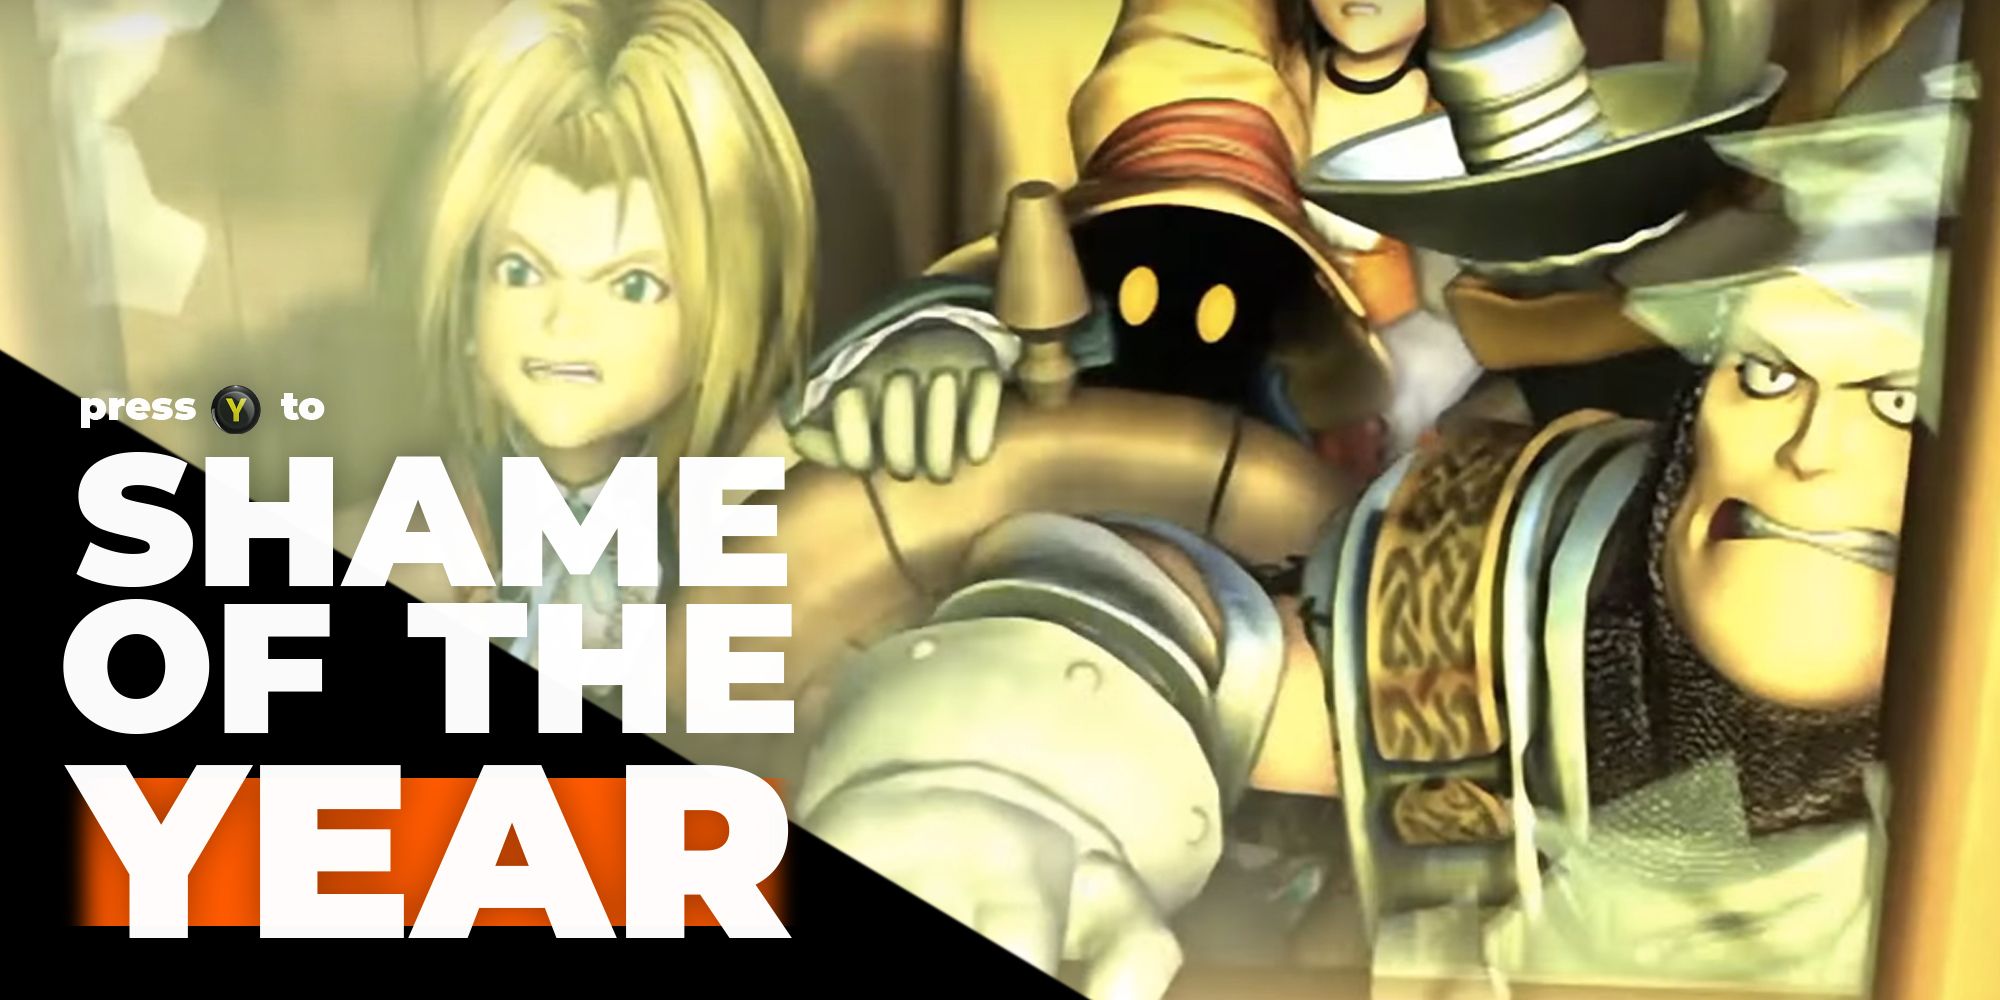 Character froms Final Fantasy 9